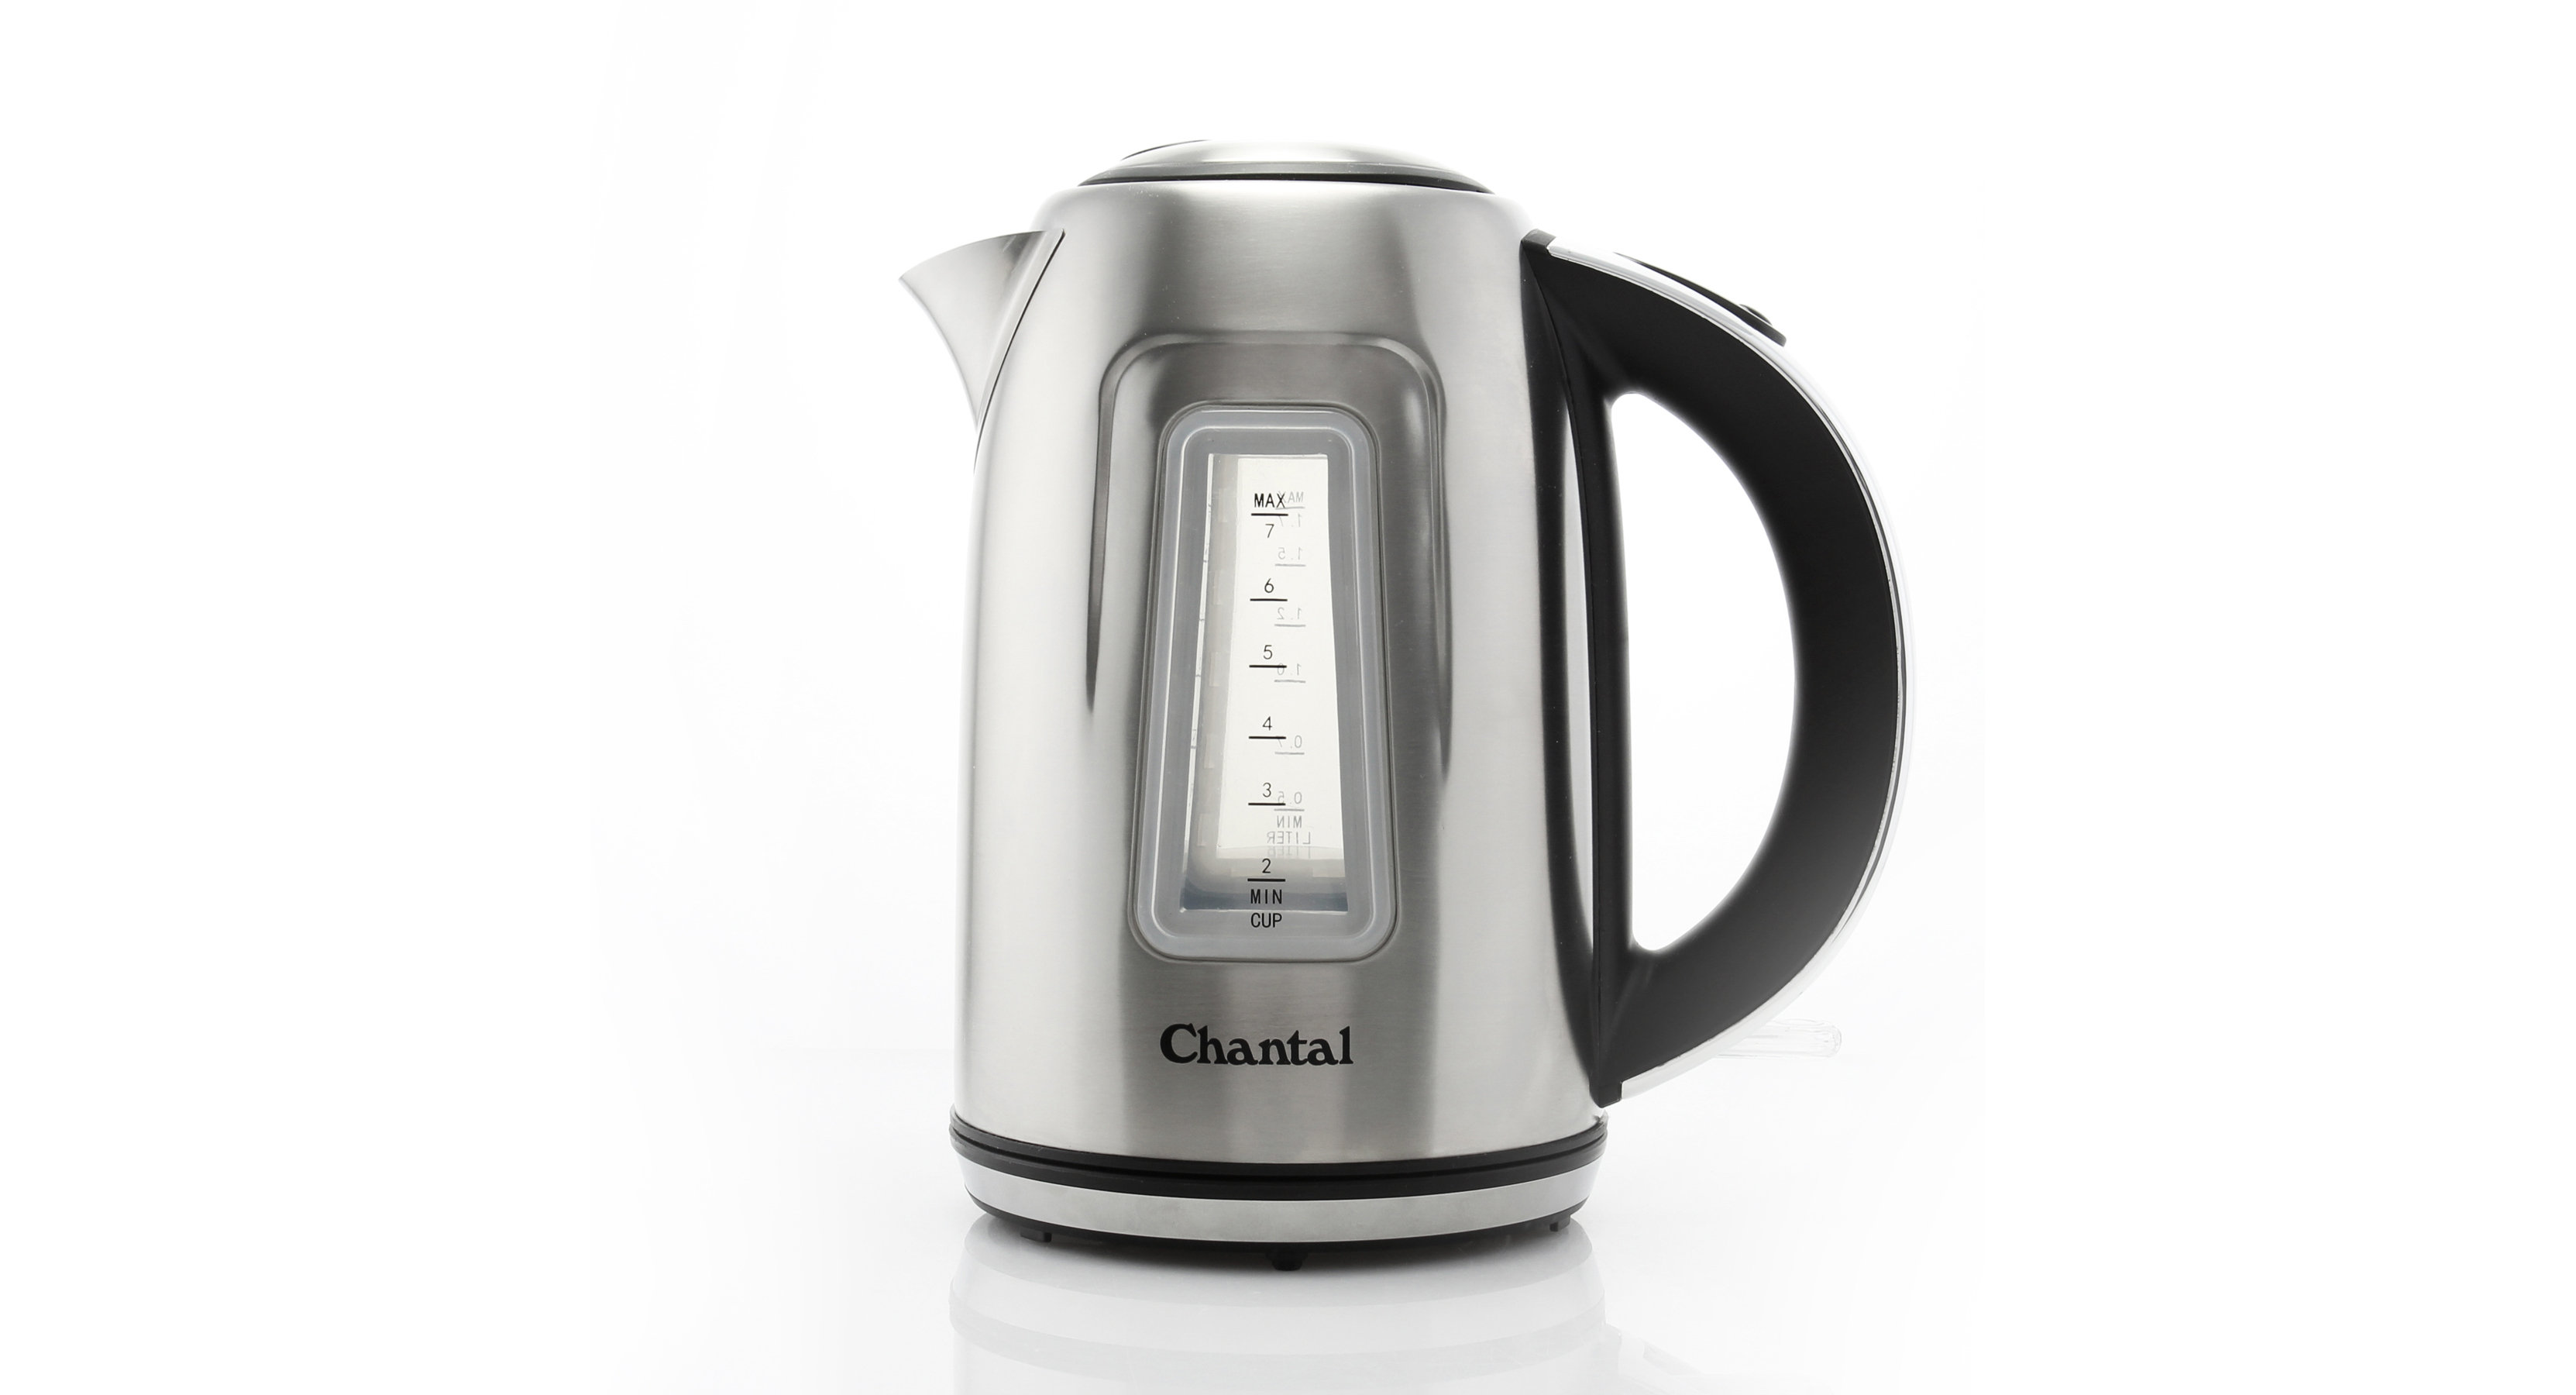 Aroma 1L Electric Water Kettle - Stainless Steel